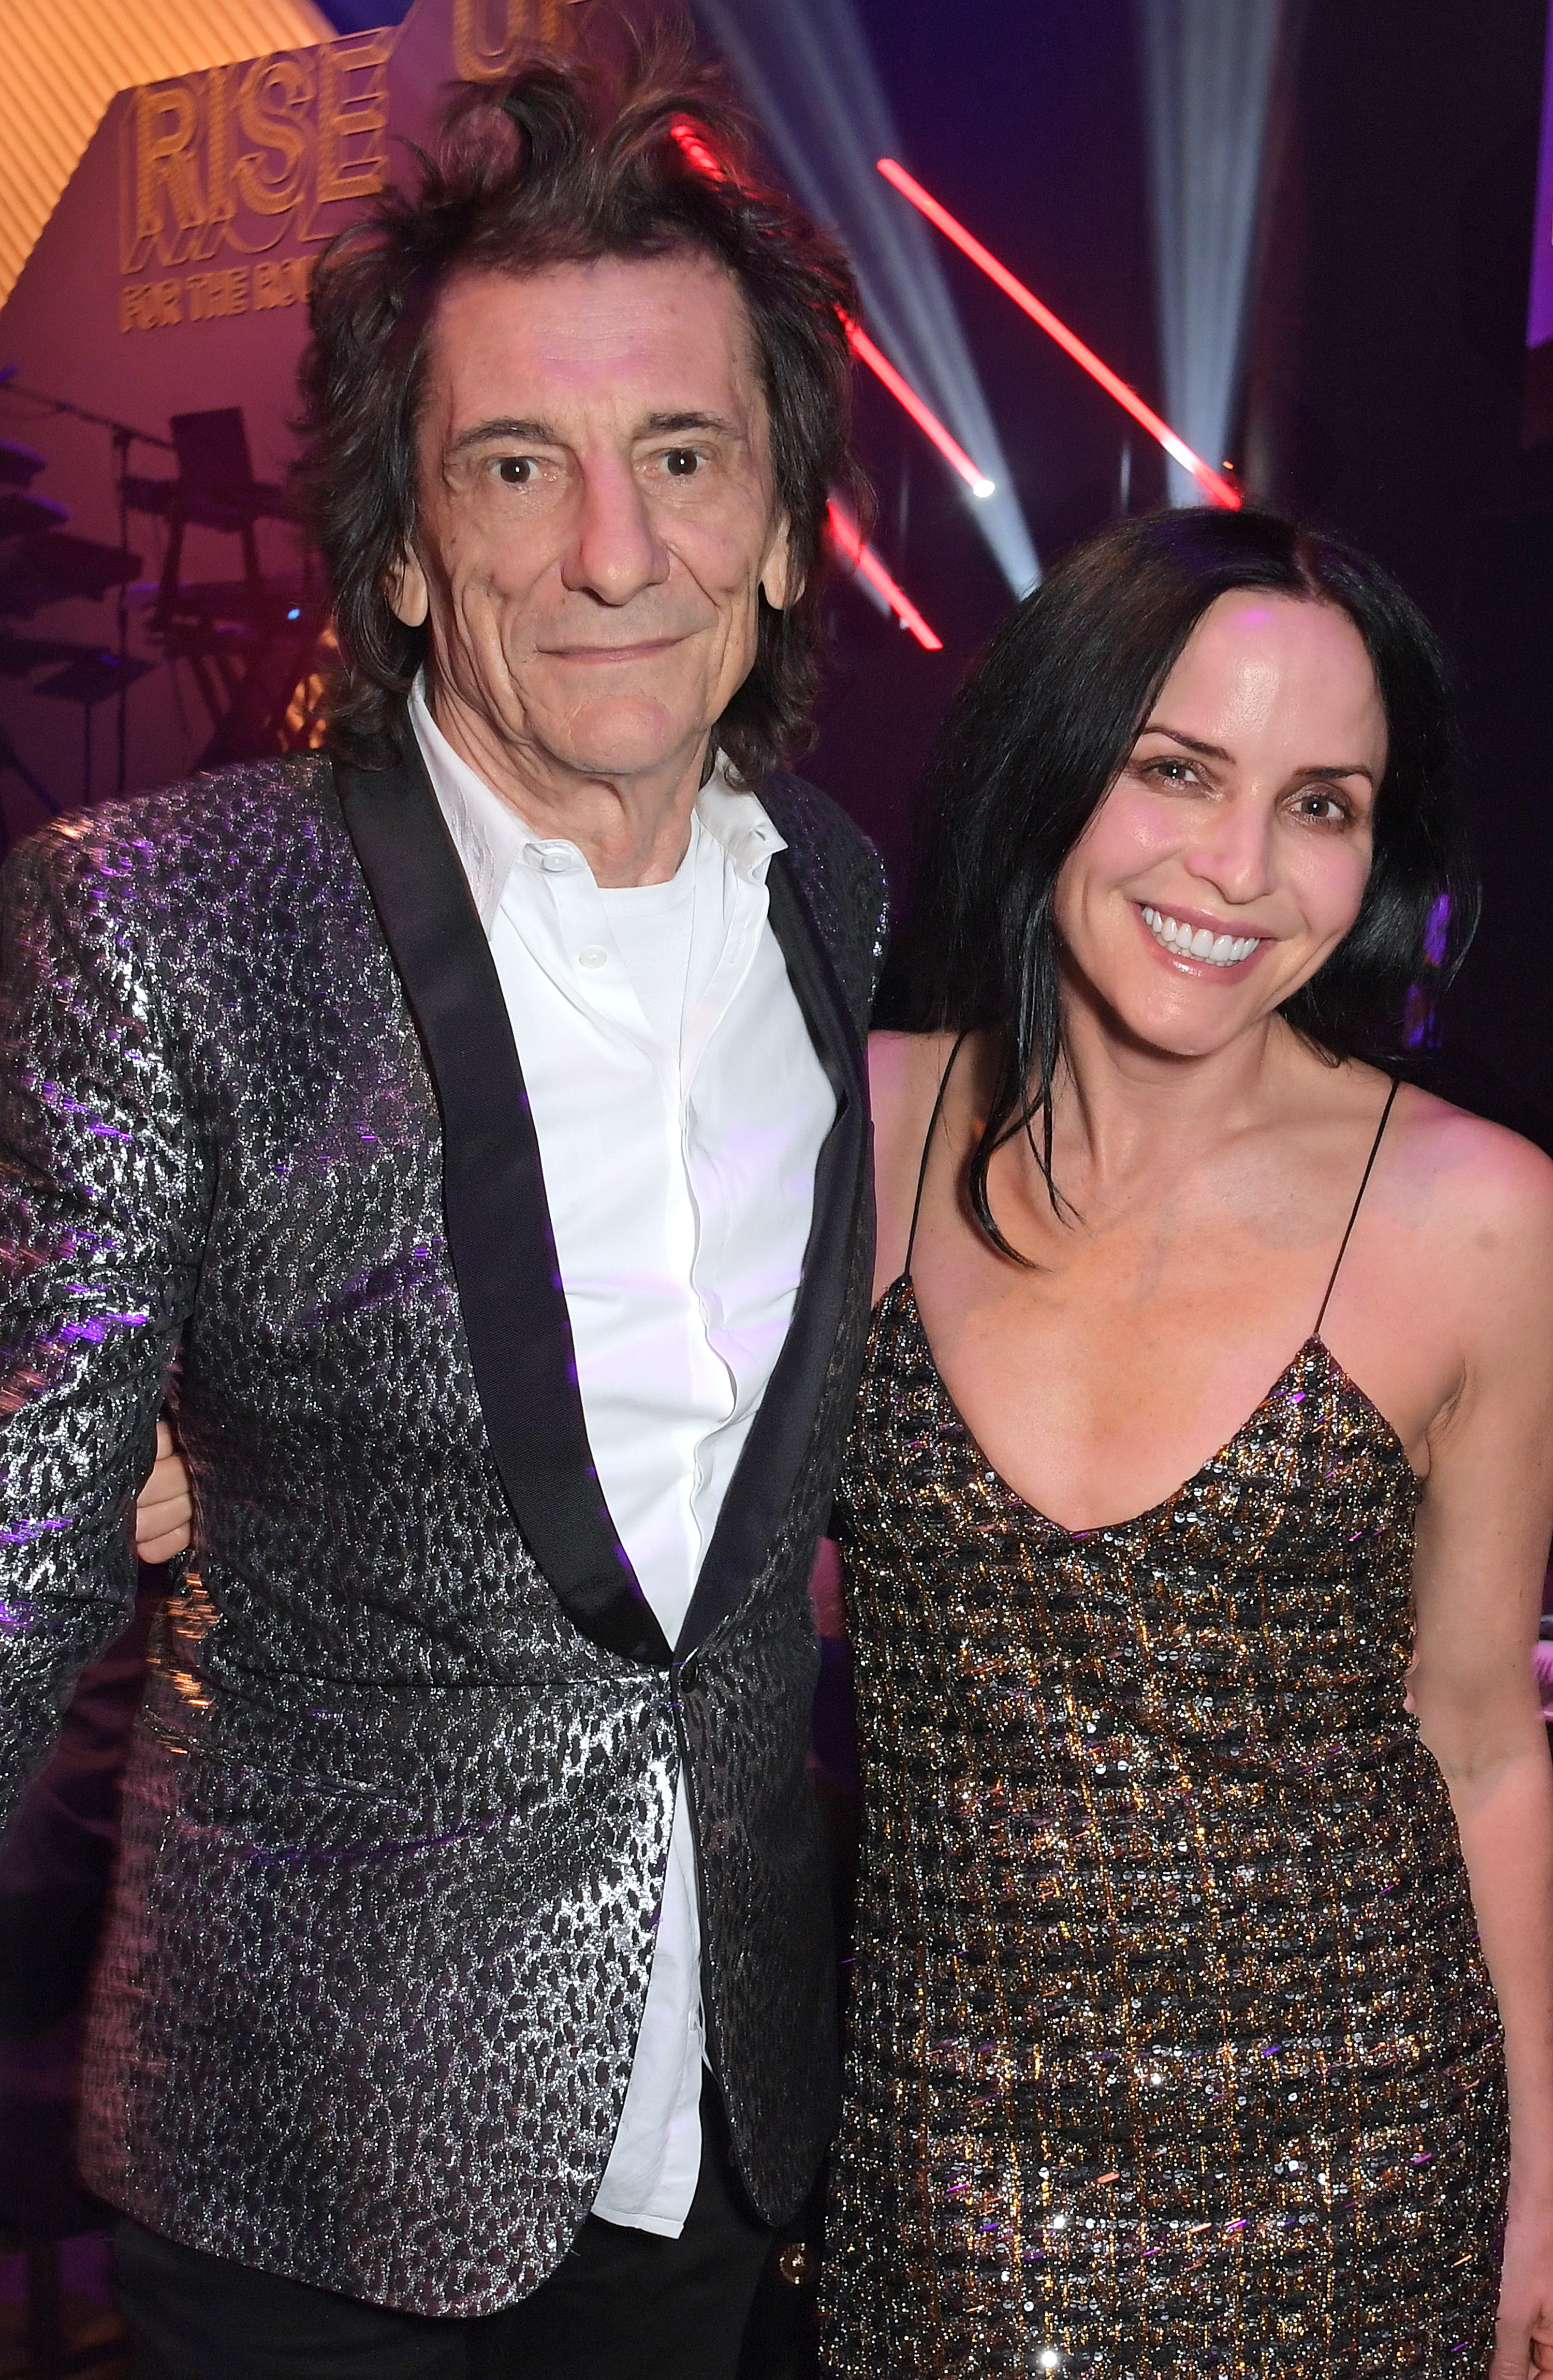 Ronnie Wood and his wife